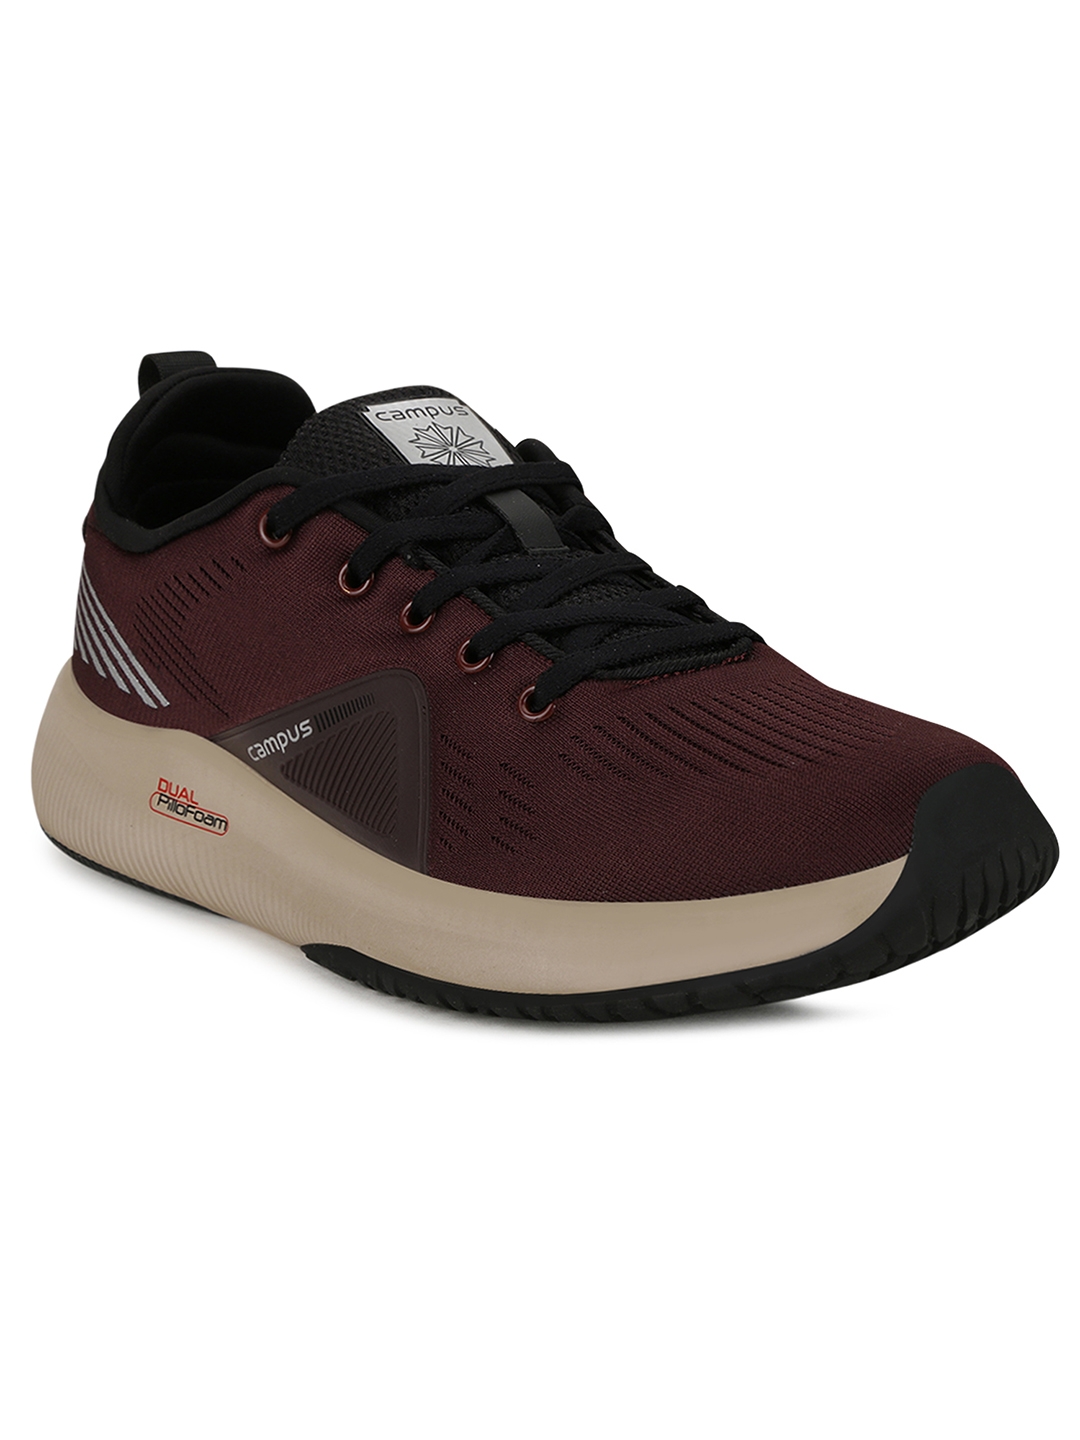 Campus Shoes | Brown Running Shoes